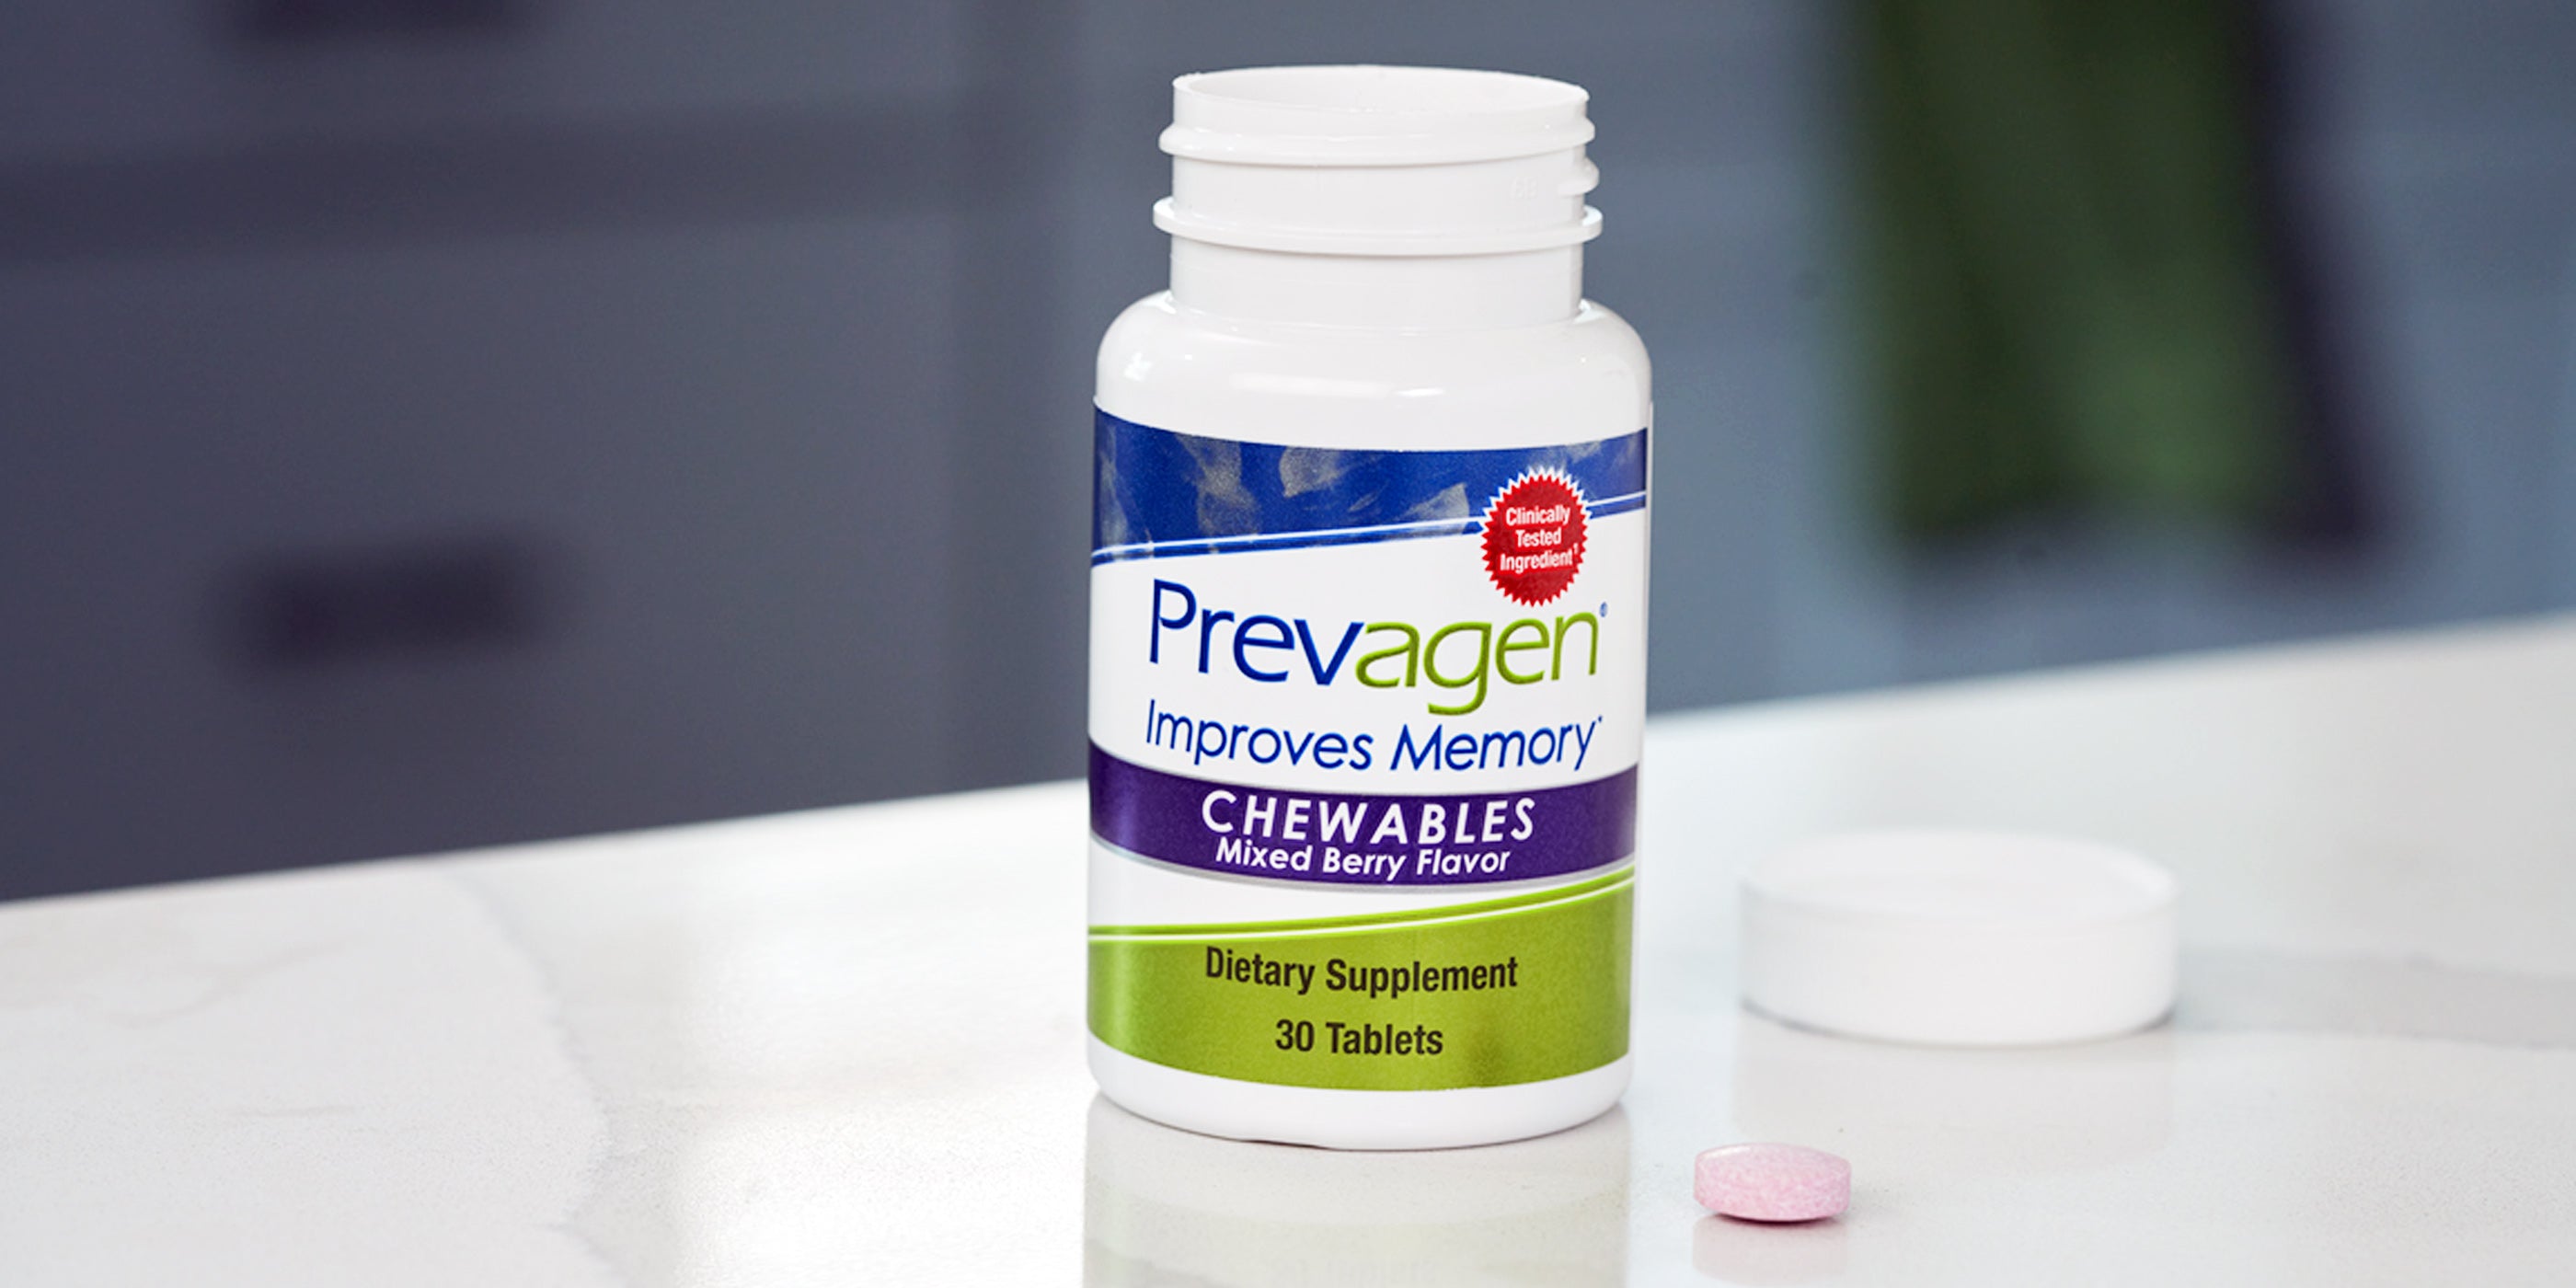 Bottle of Prevagen mixed berry flavor chewables on kitchen counter